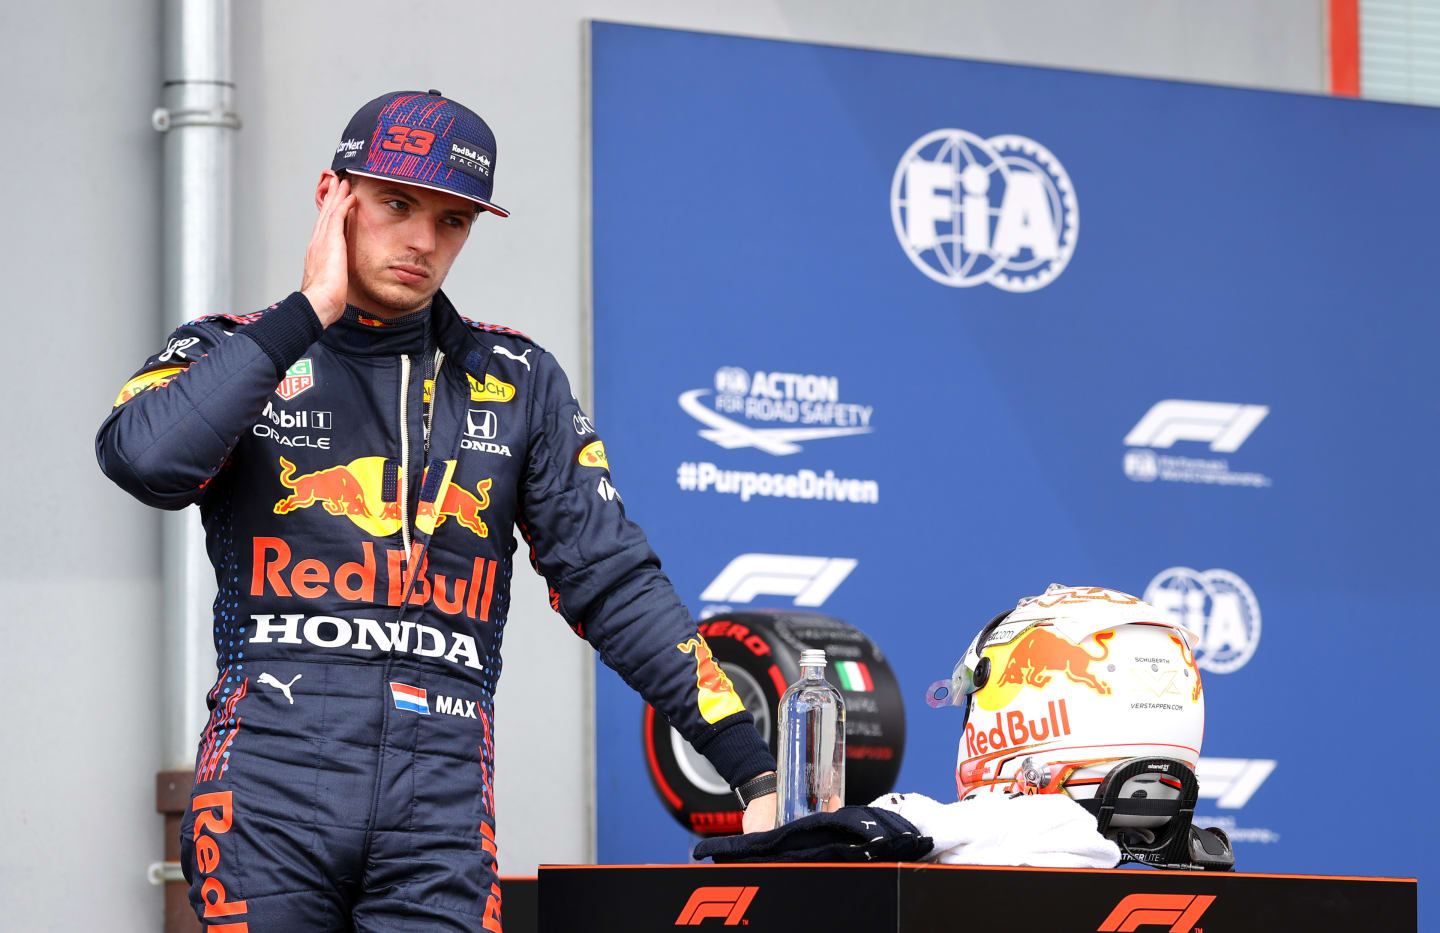 IMOLA, ITALY - APRIL 17: Third place qualifier Max Verstappen of Netherlands and Red Bull Racing